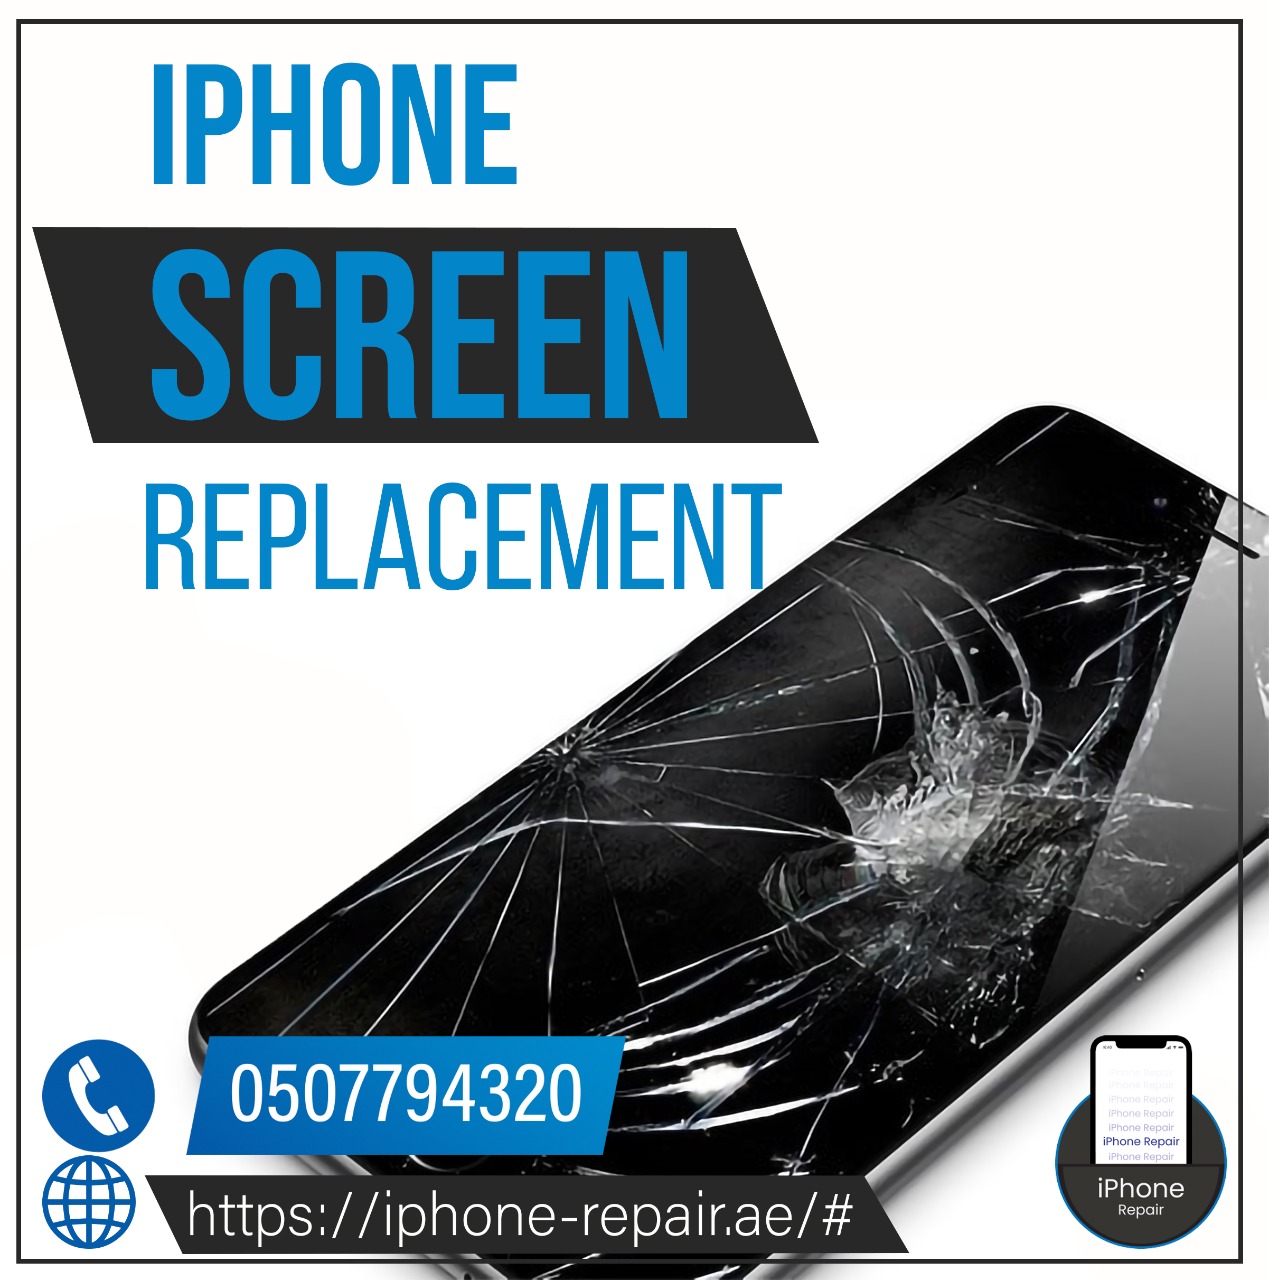 Iphone screen replacement